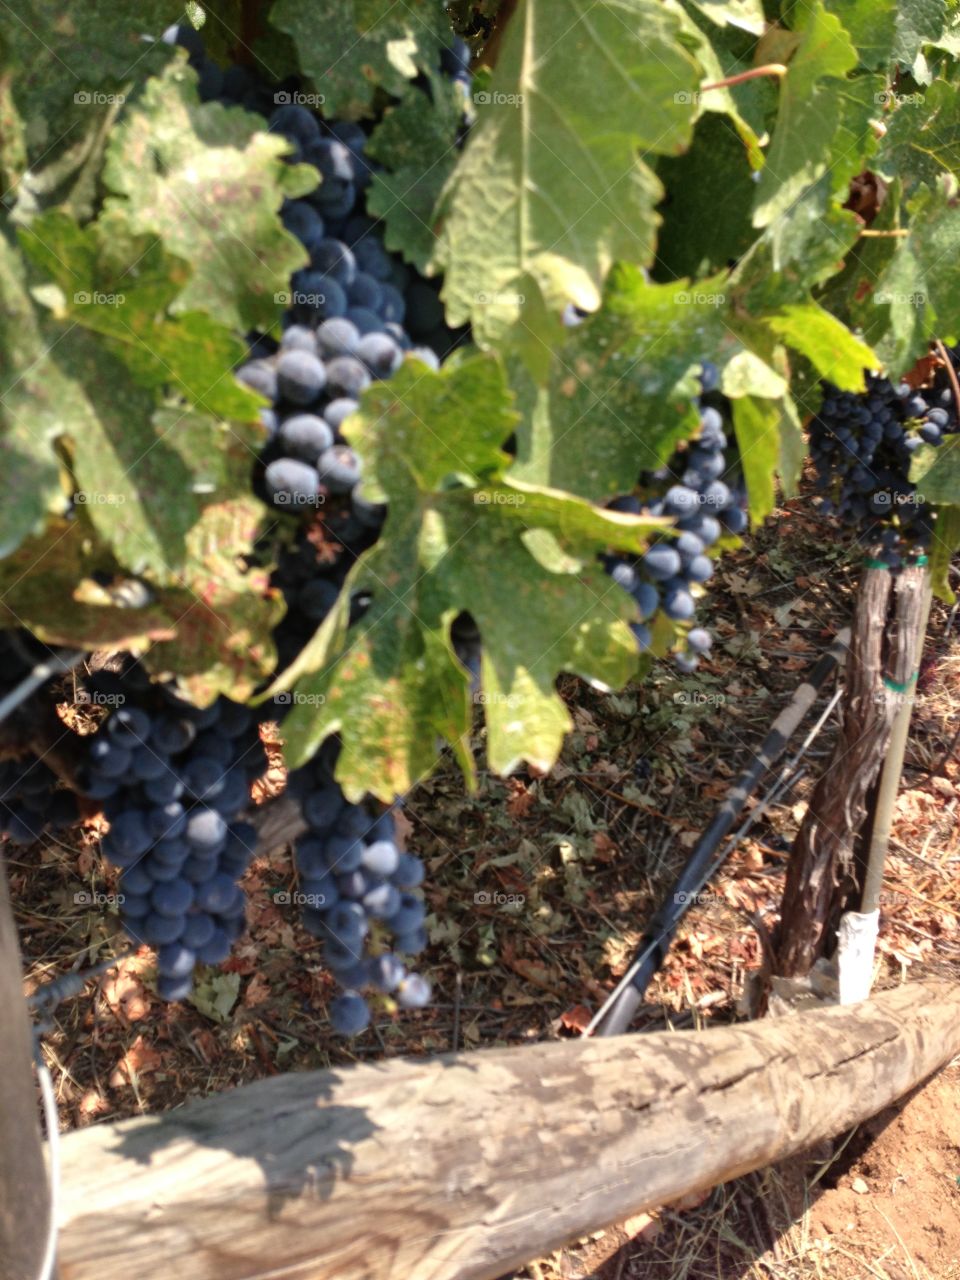 Grapes on a vine in a California vineyard.  Luscious red wine grapes ready to be harvested.